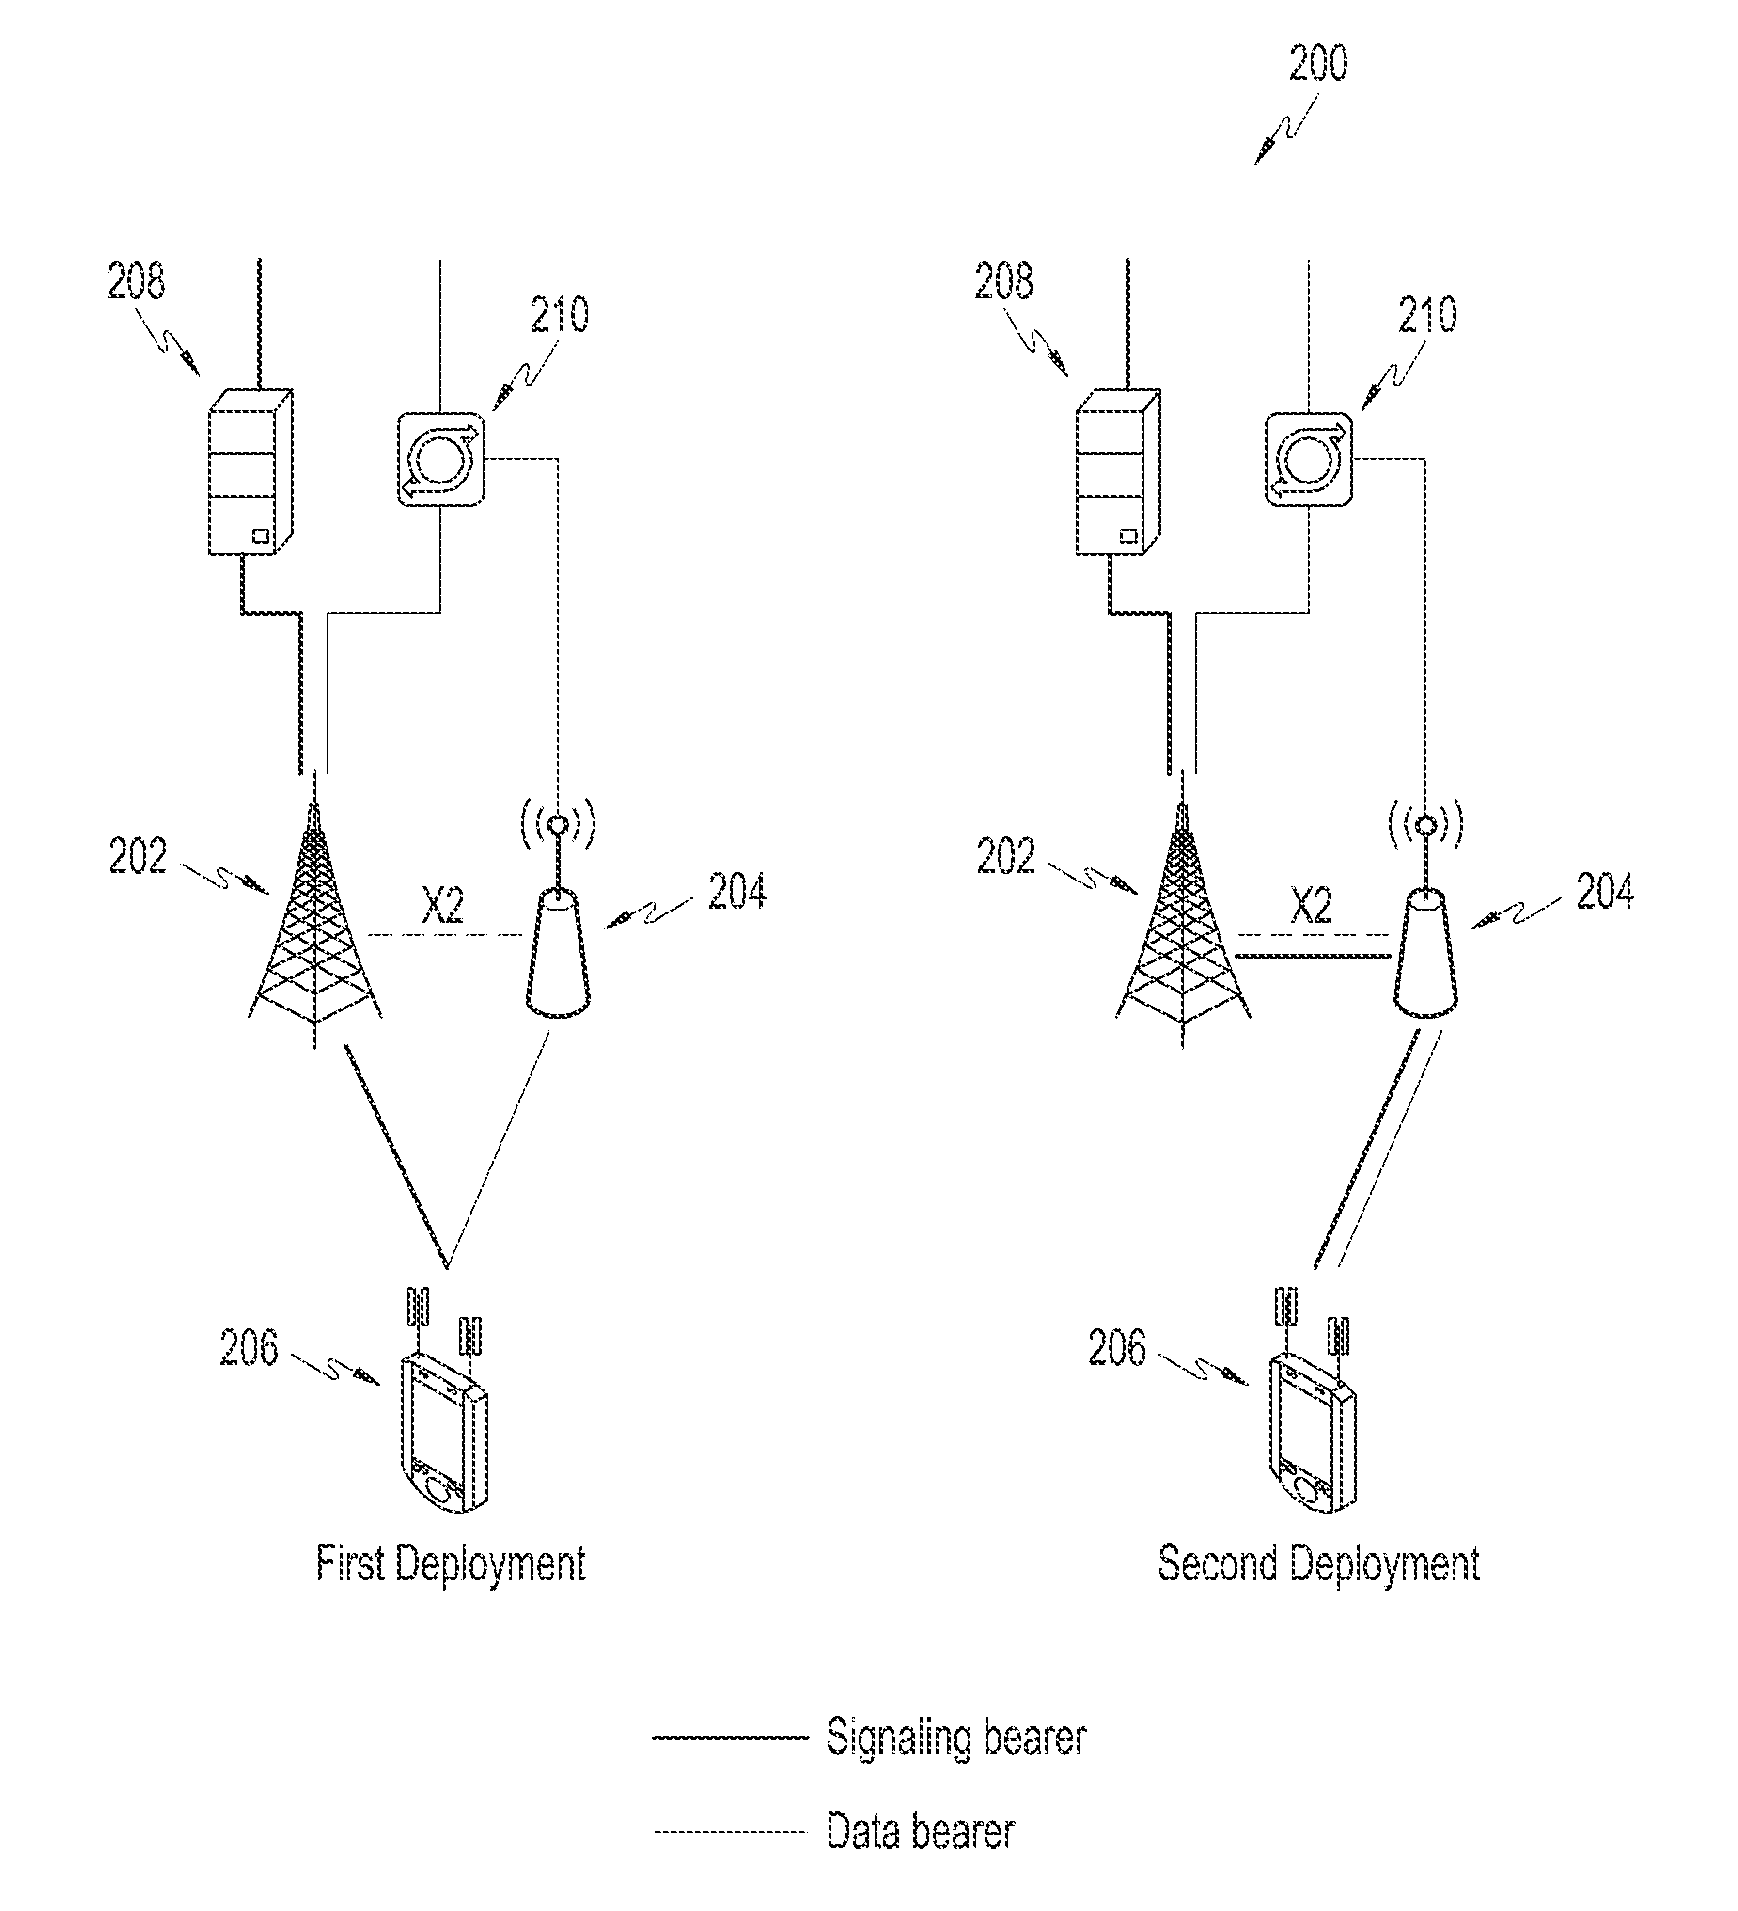 Method and system for providing small cell deployment and access in a wireless communication system